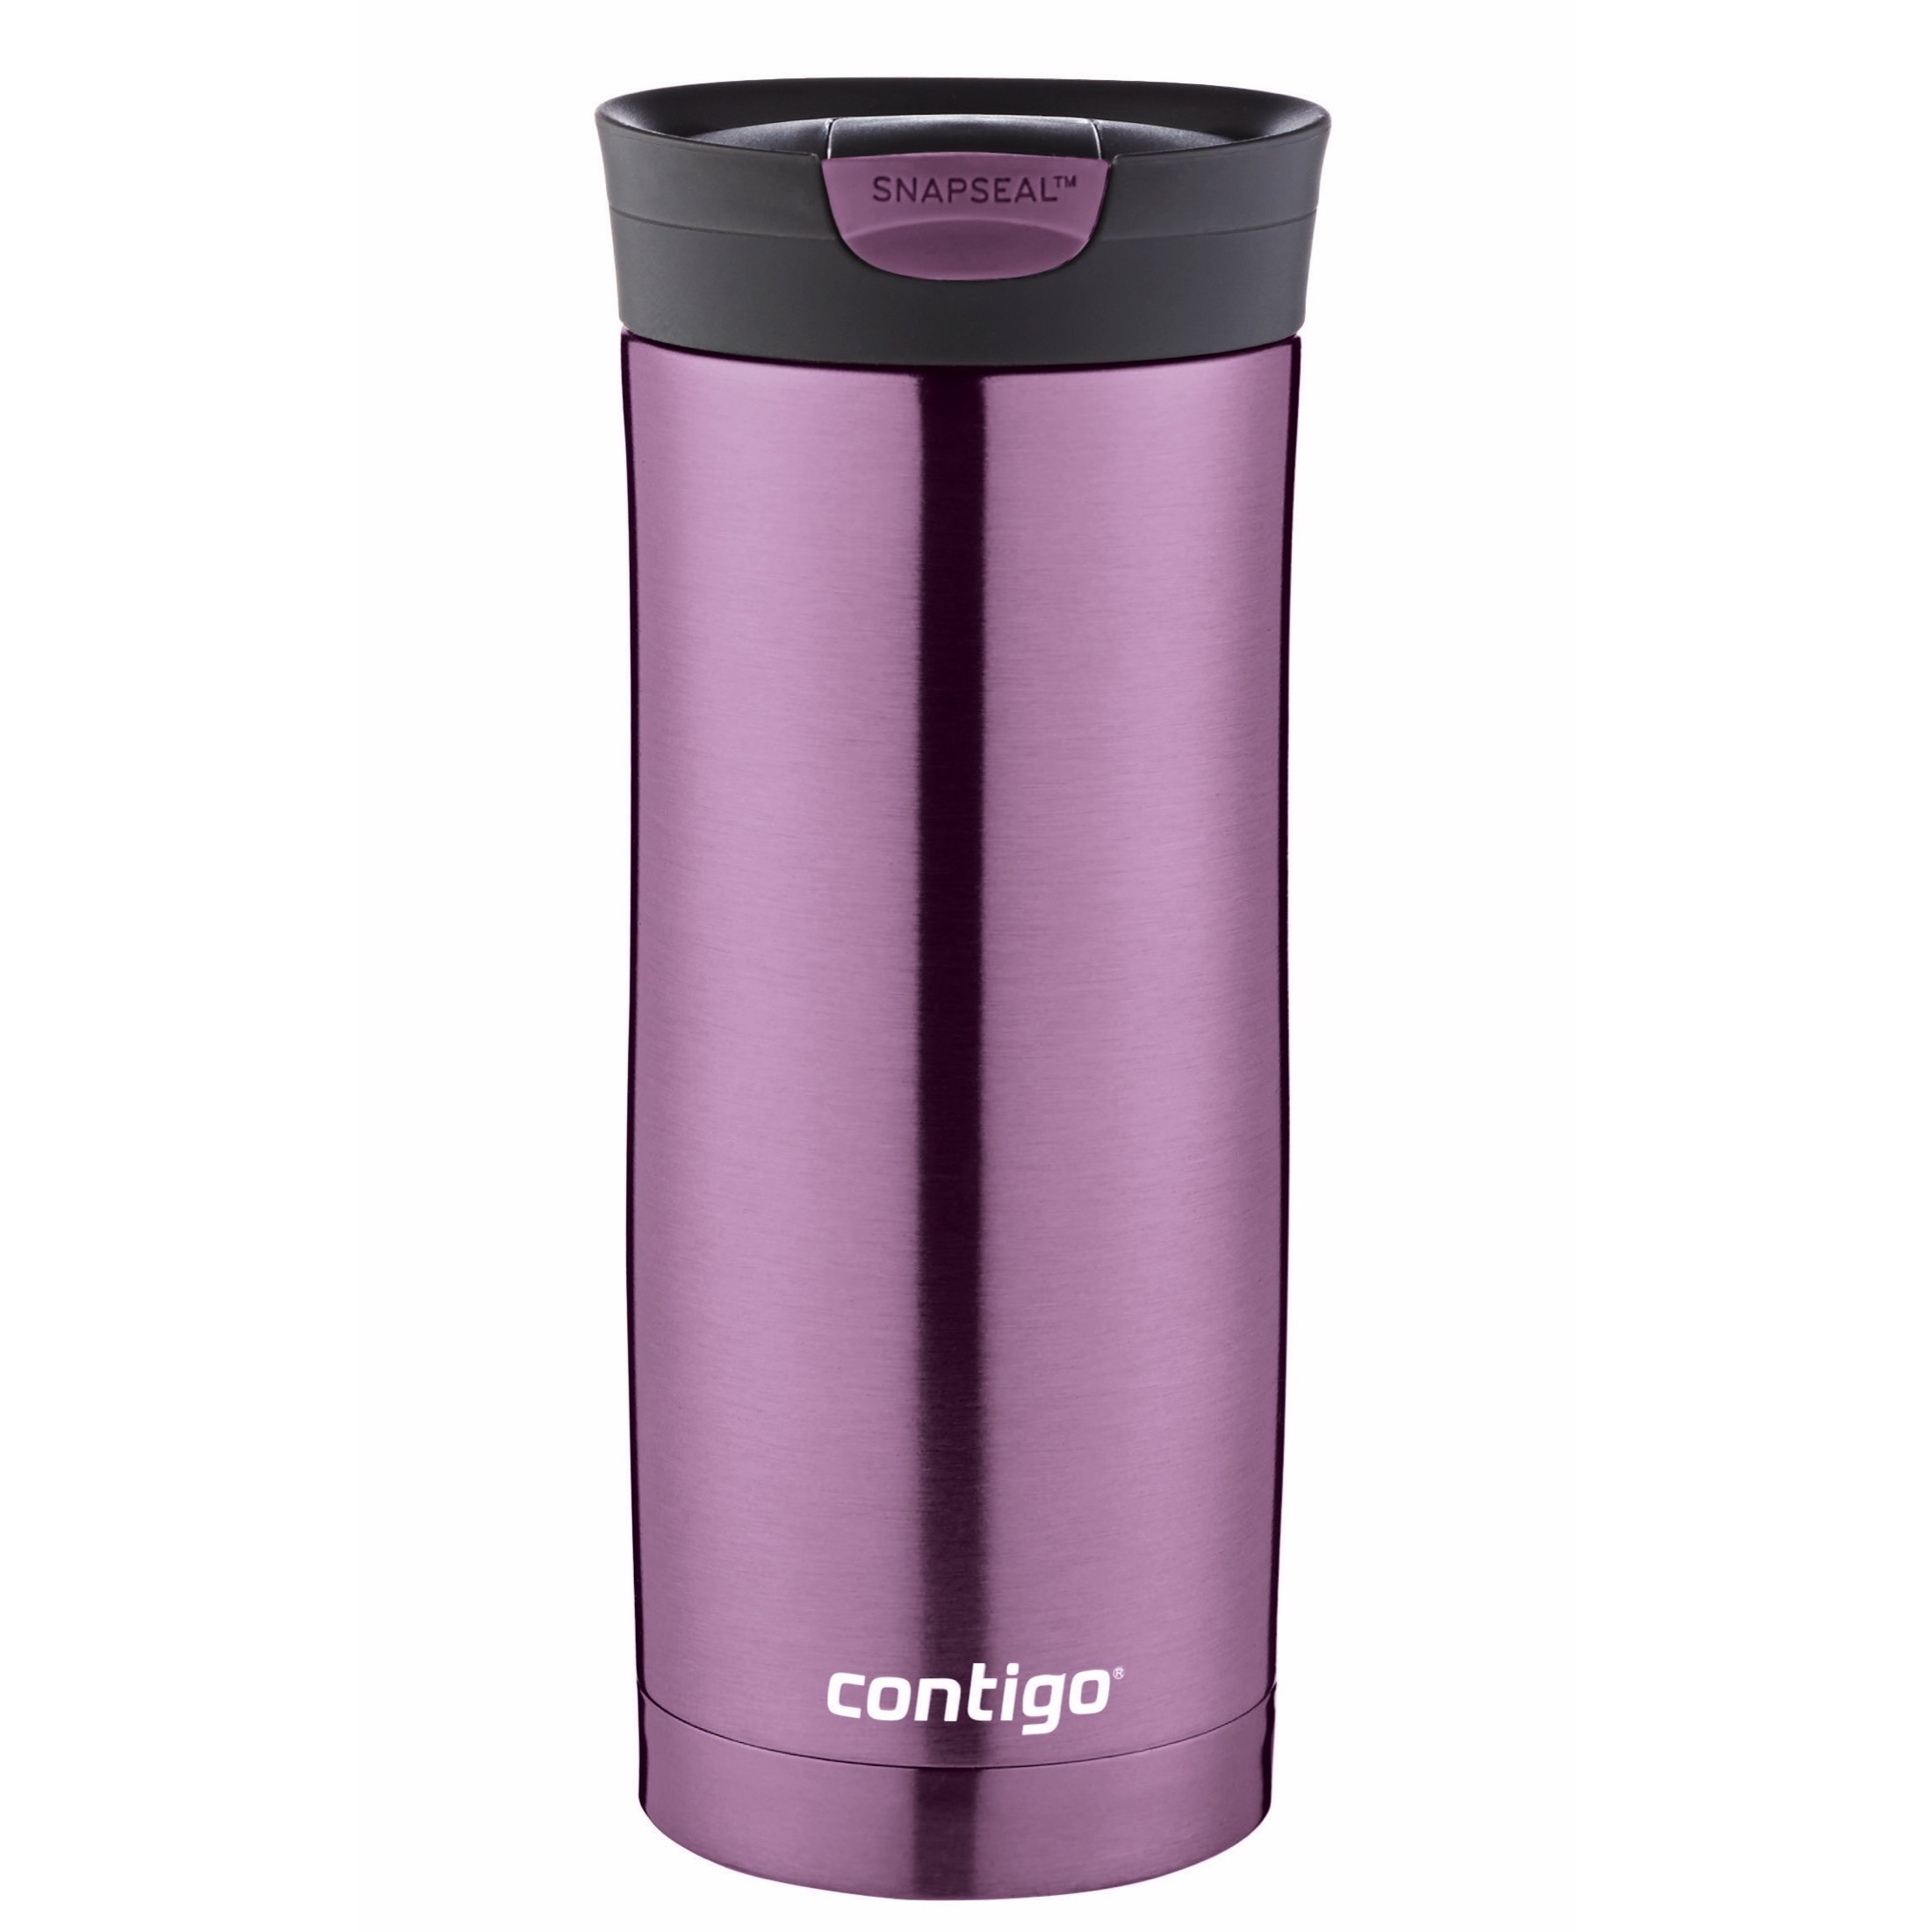 Contigo Byron Stainless Steel Travel Mug with SNAPSEAL Lid Purple Radiant Orchid, 16 fl oz. - image 1 of 2